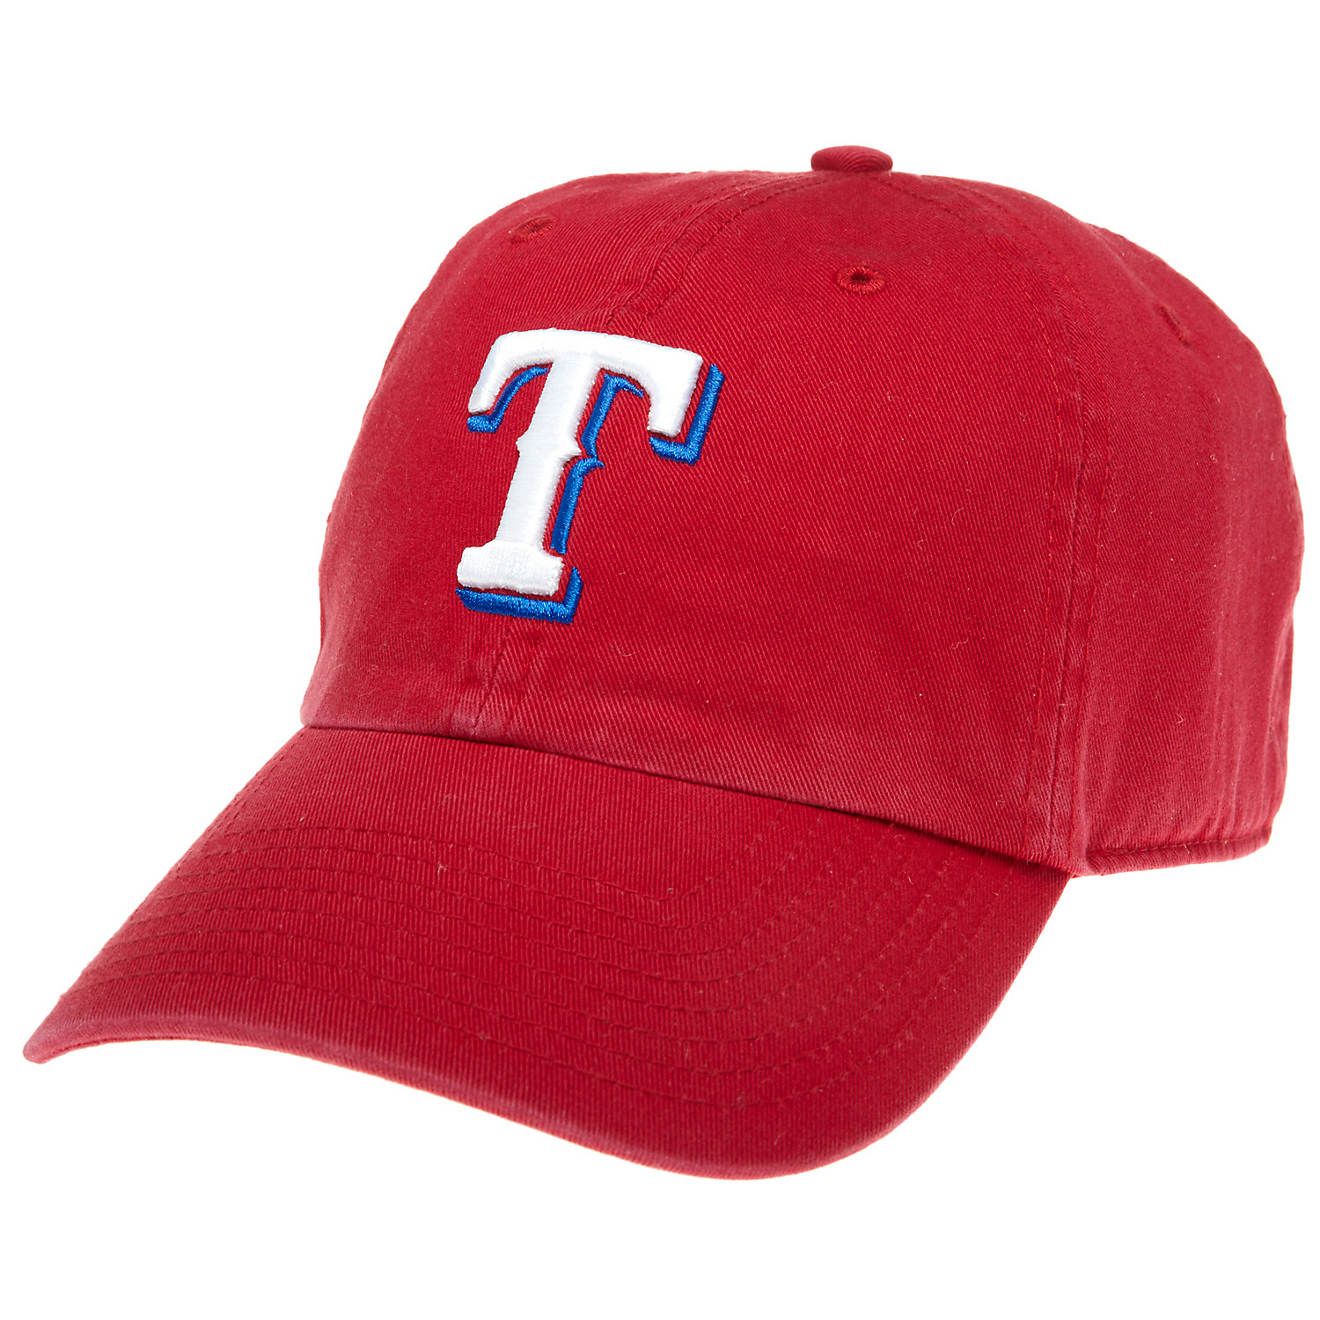 '47 Men's Alternate Cleanup Rangers Baseball Hat | Academy Sports + Outdoor Affiliate